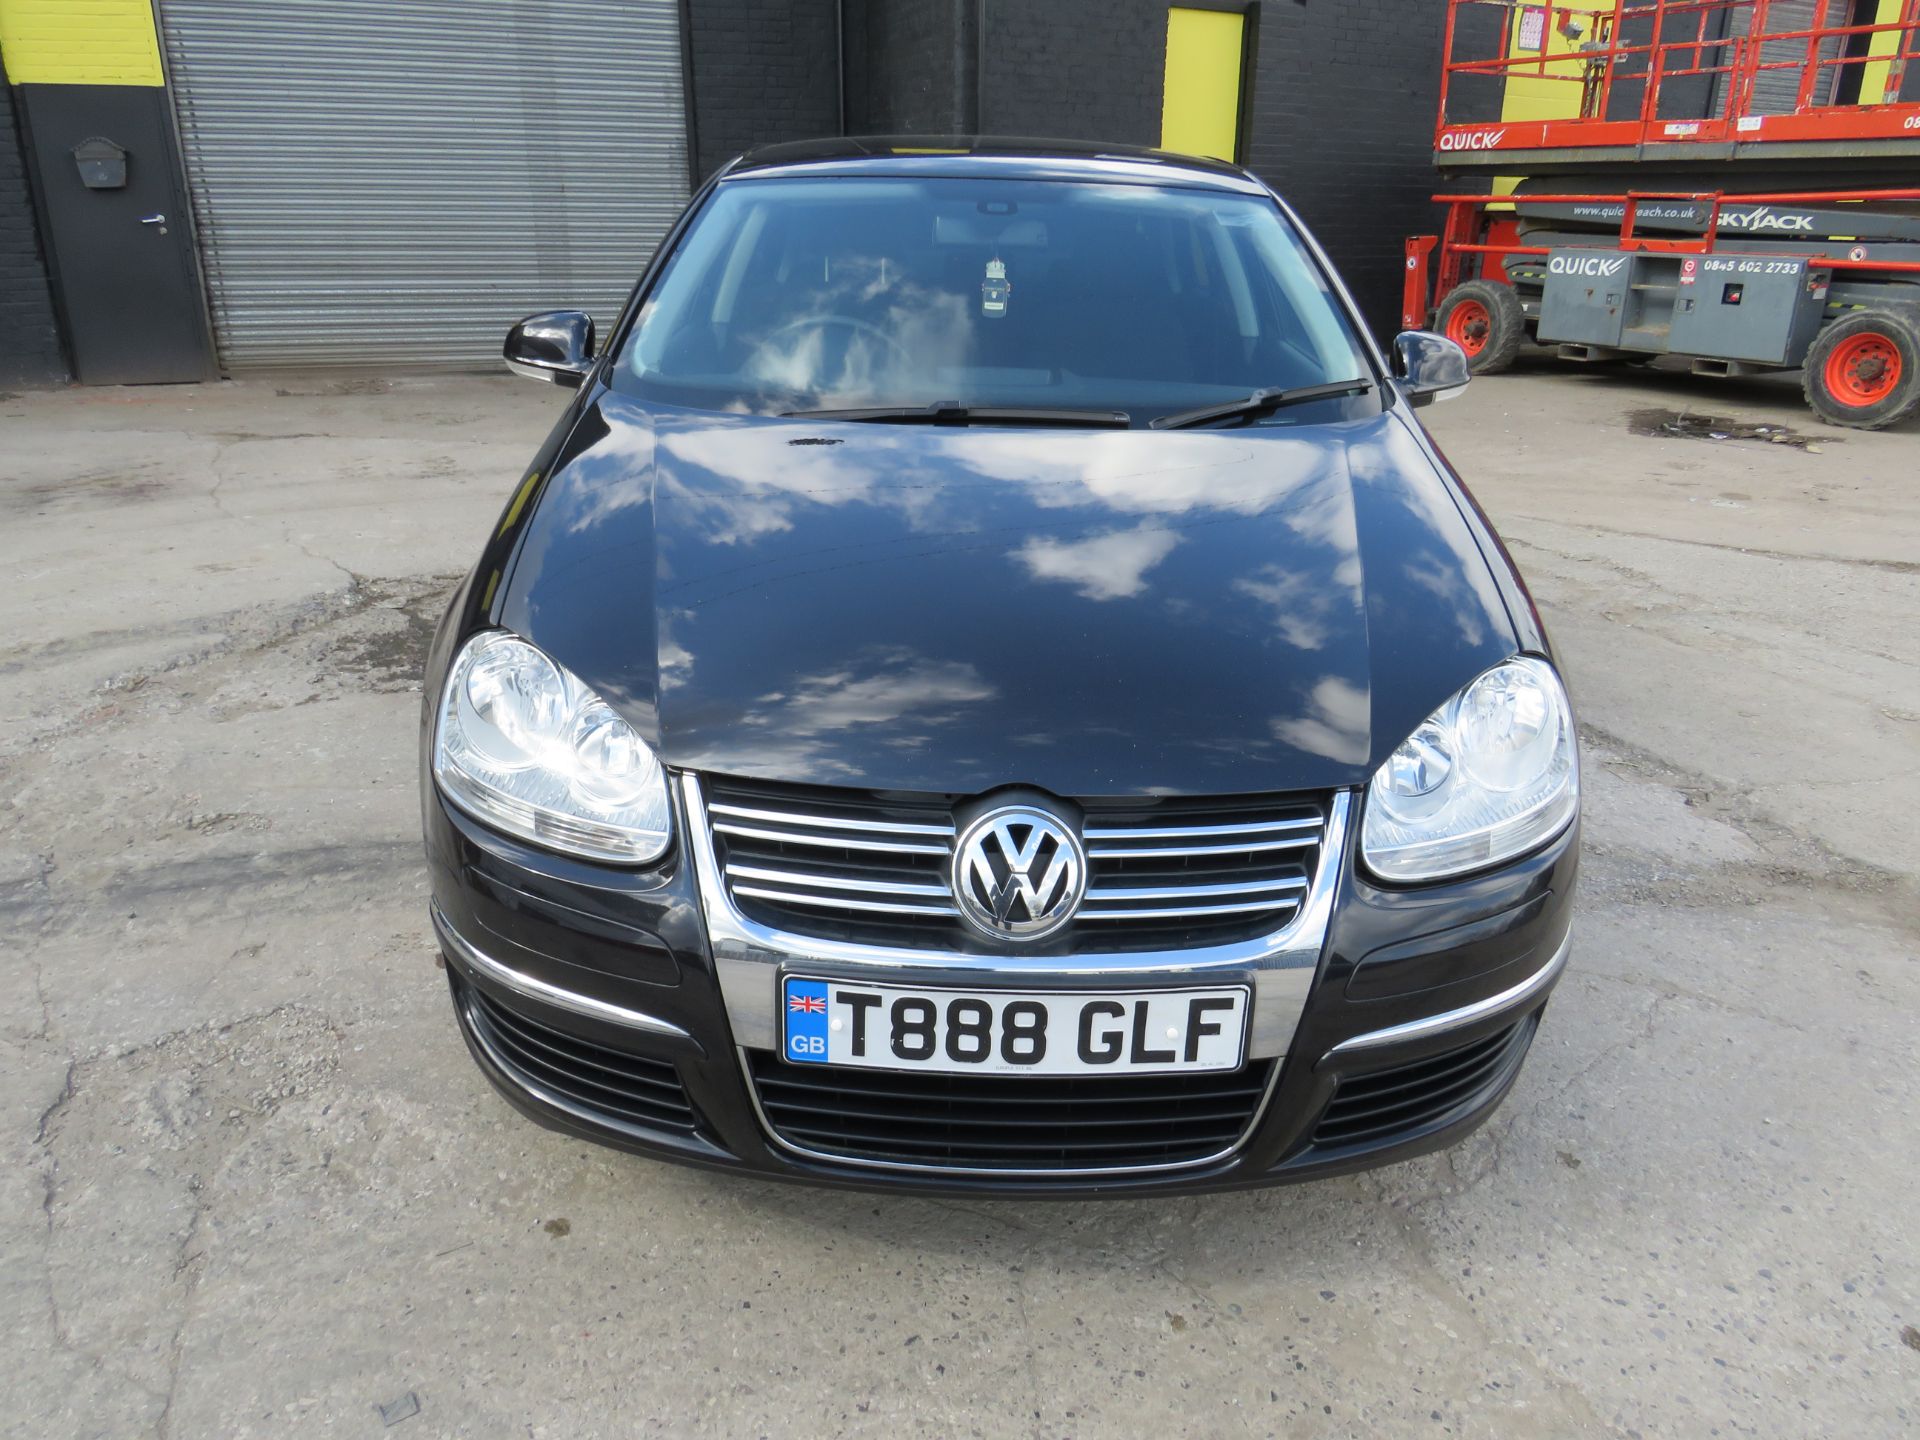 2010 Volkswagon Jetta 1.6 TDI, 93,727 miles (unchecked), MOT unit 13th August 2023, has owners packa